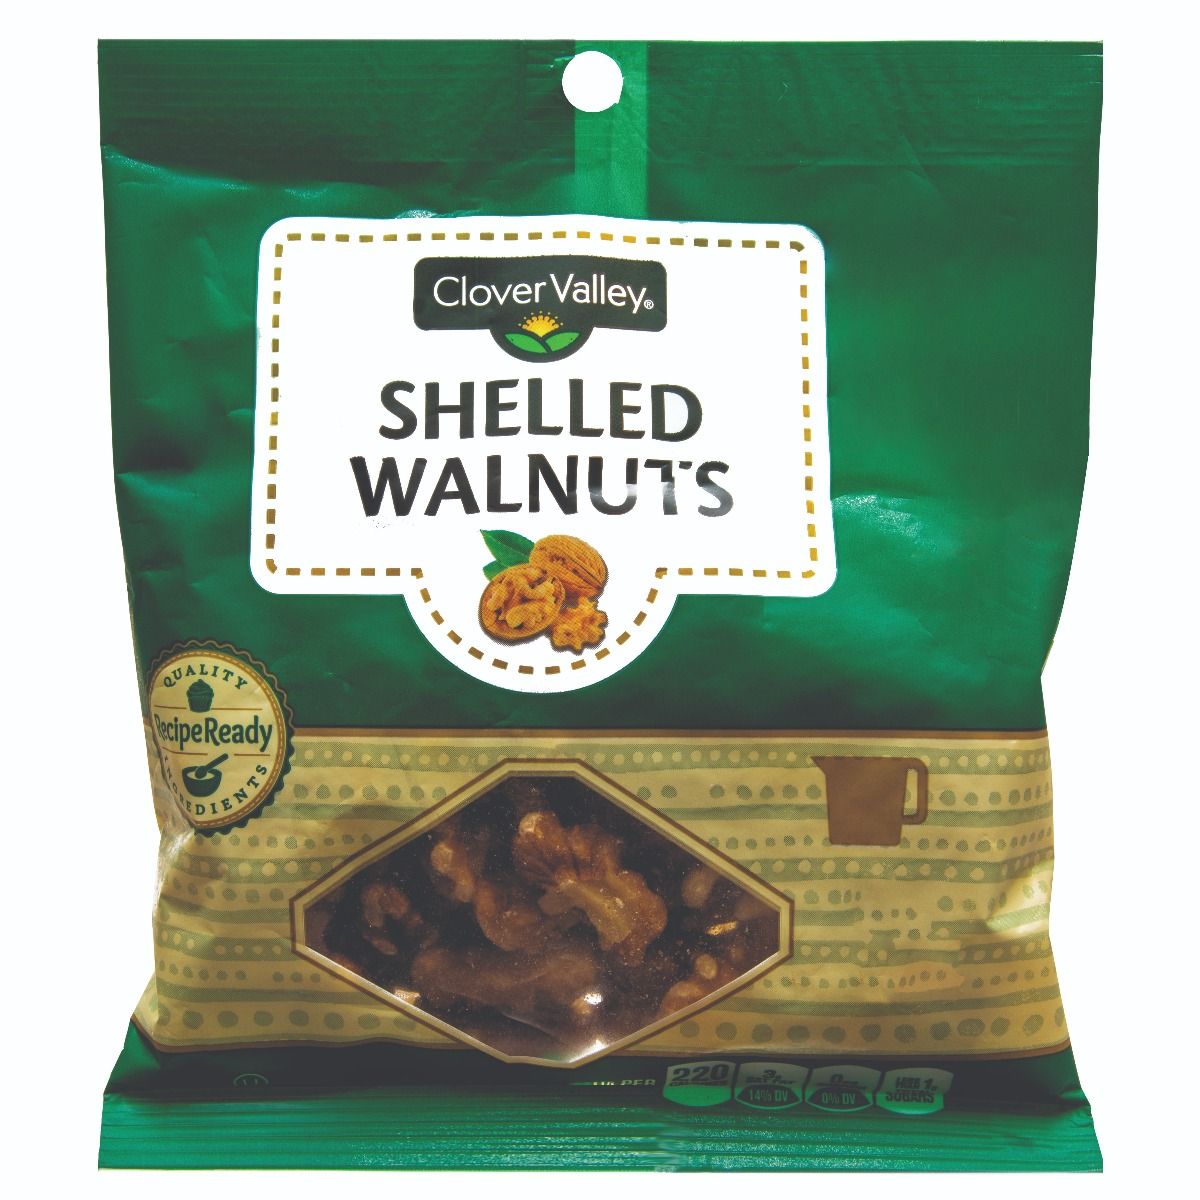 Clover Valley Shelled Walnuts, 4 oz